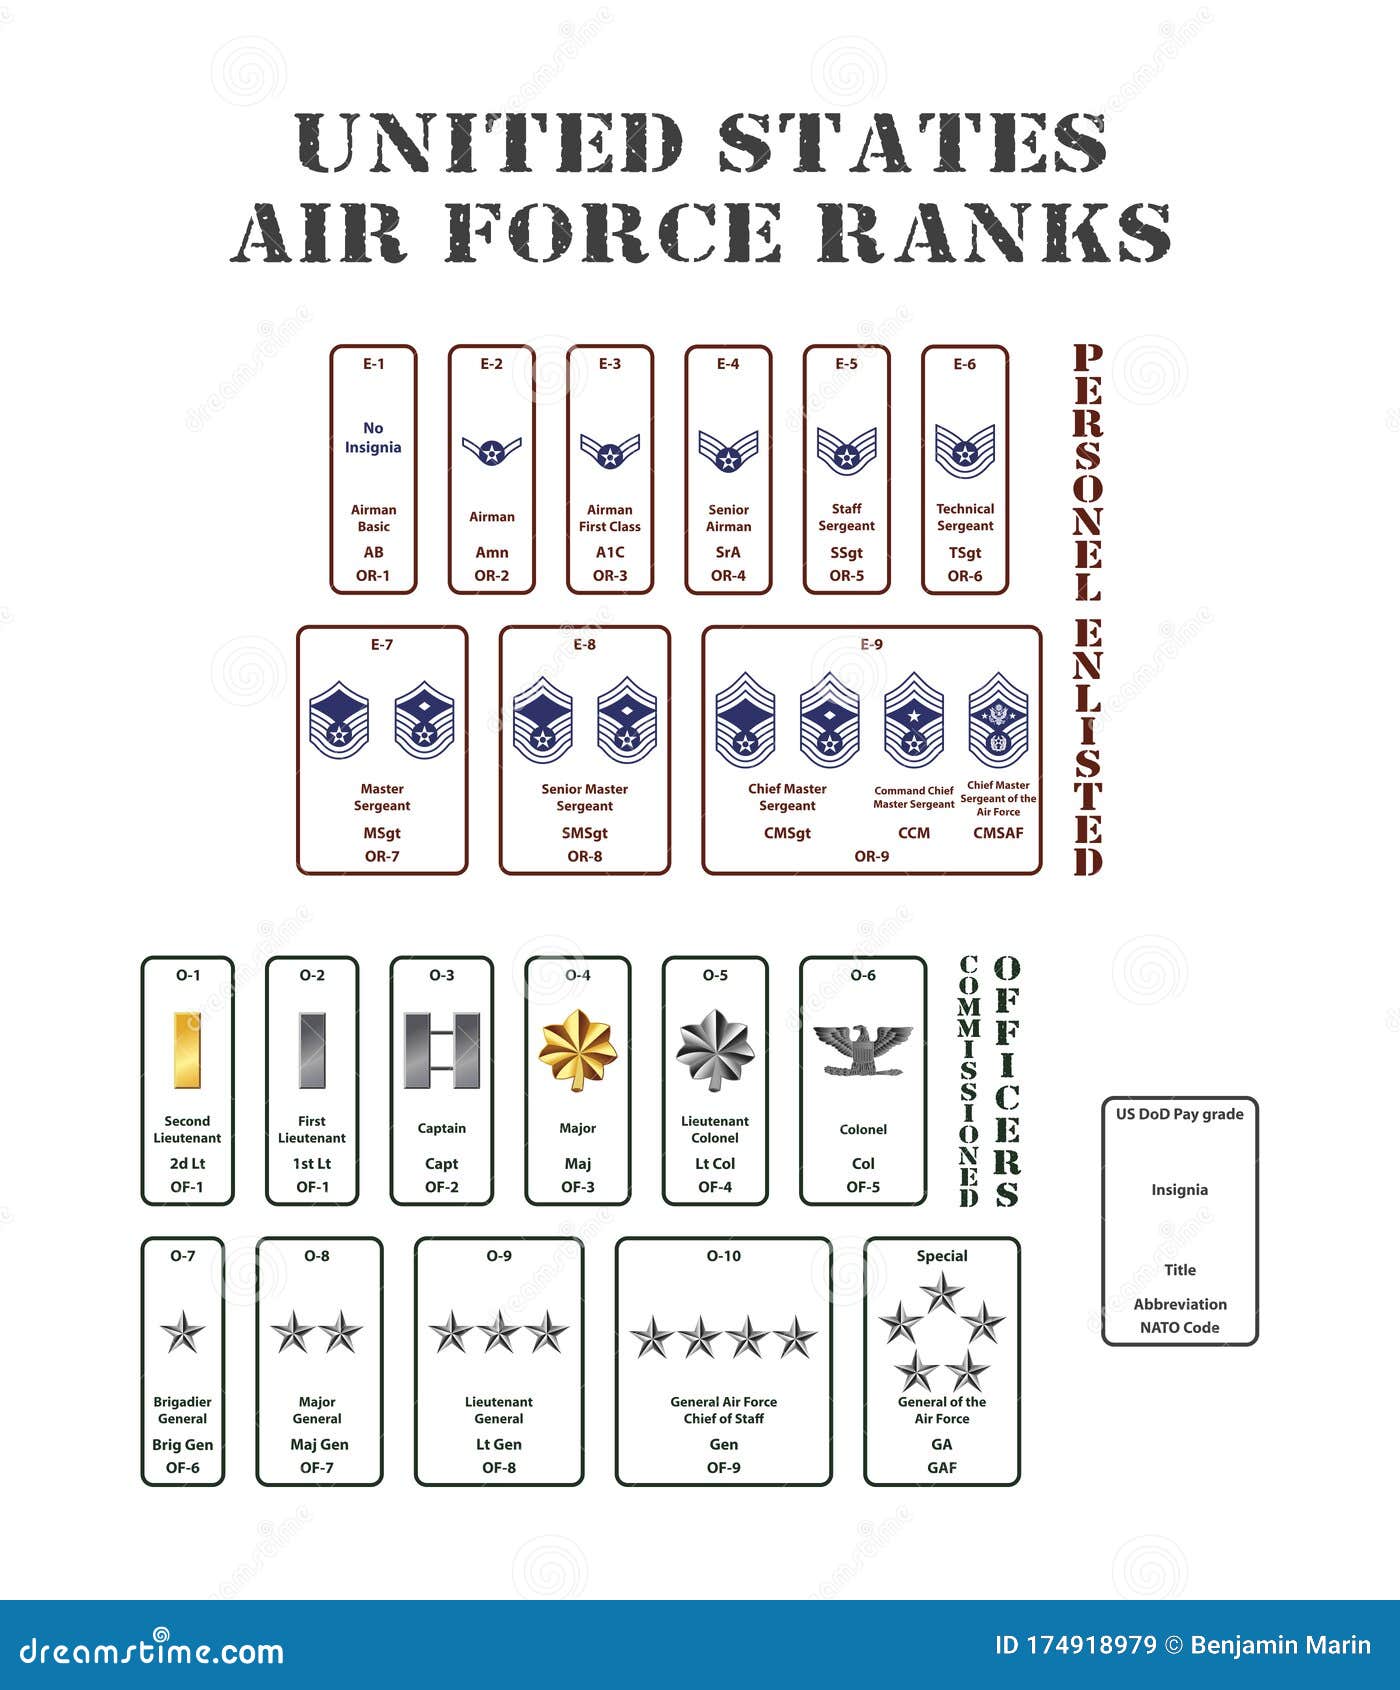 United States Air Force Ranks